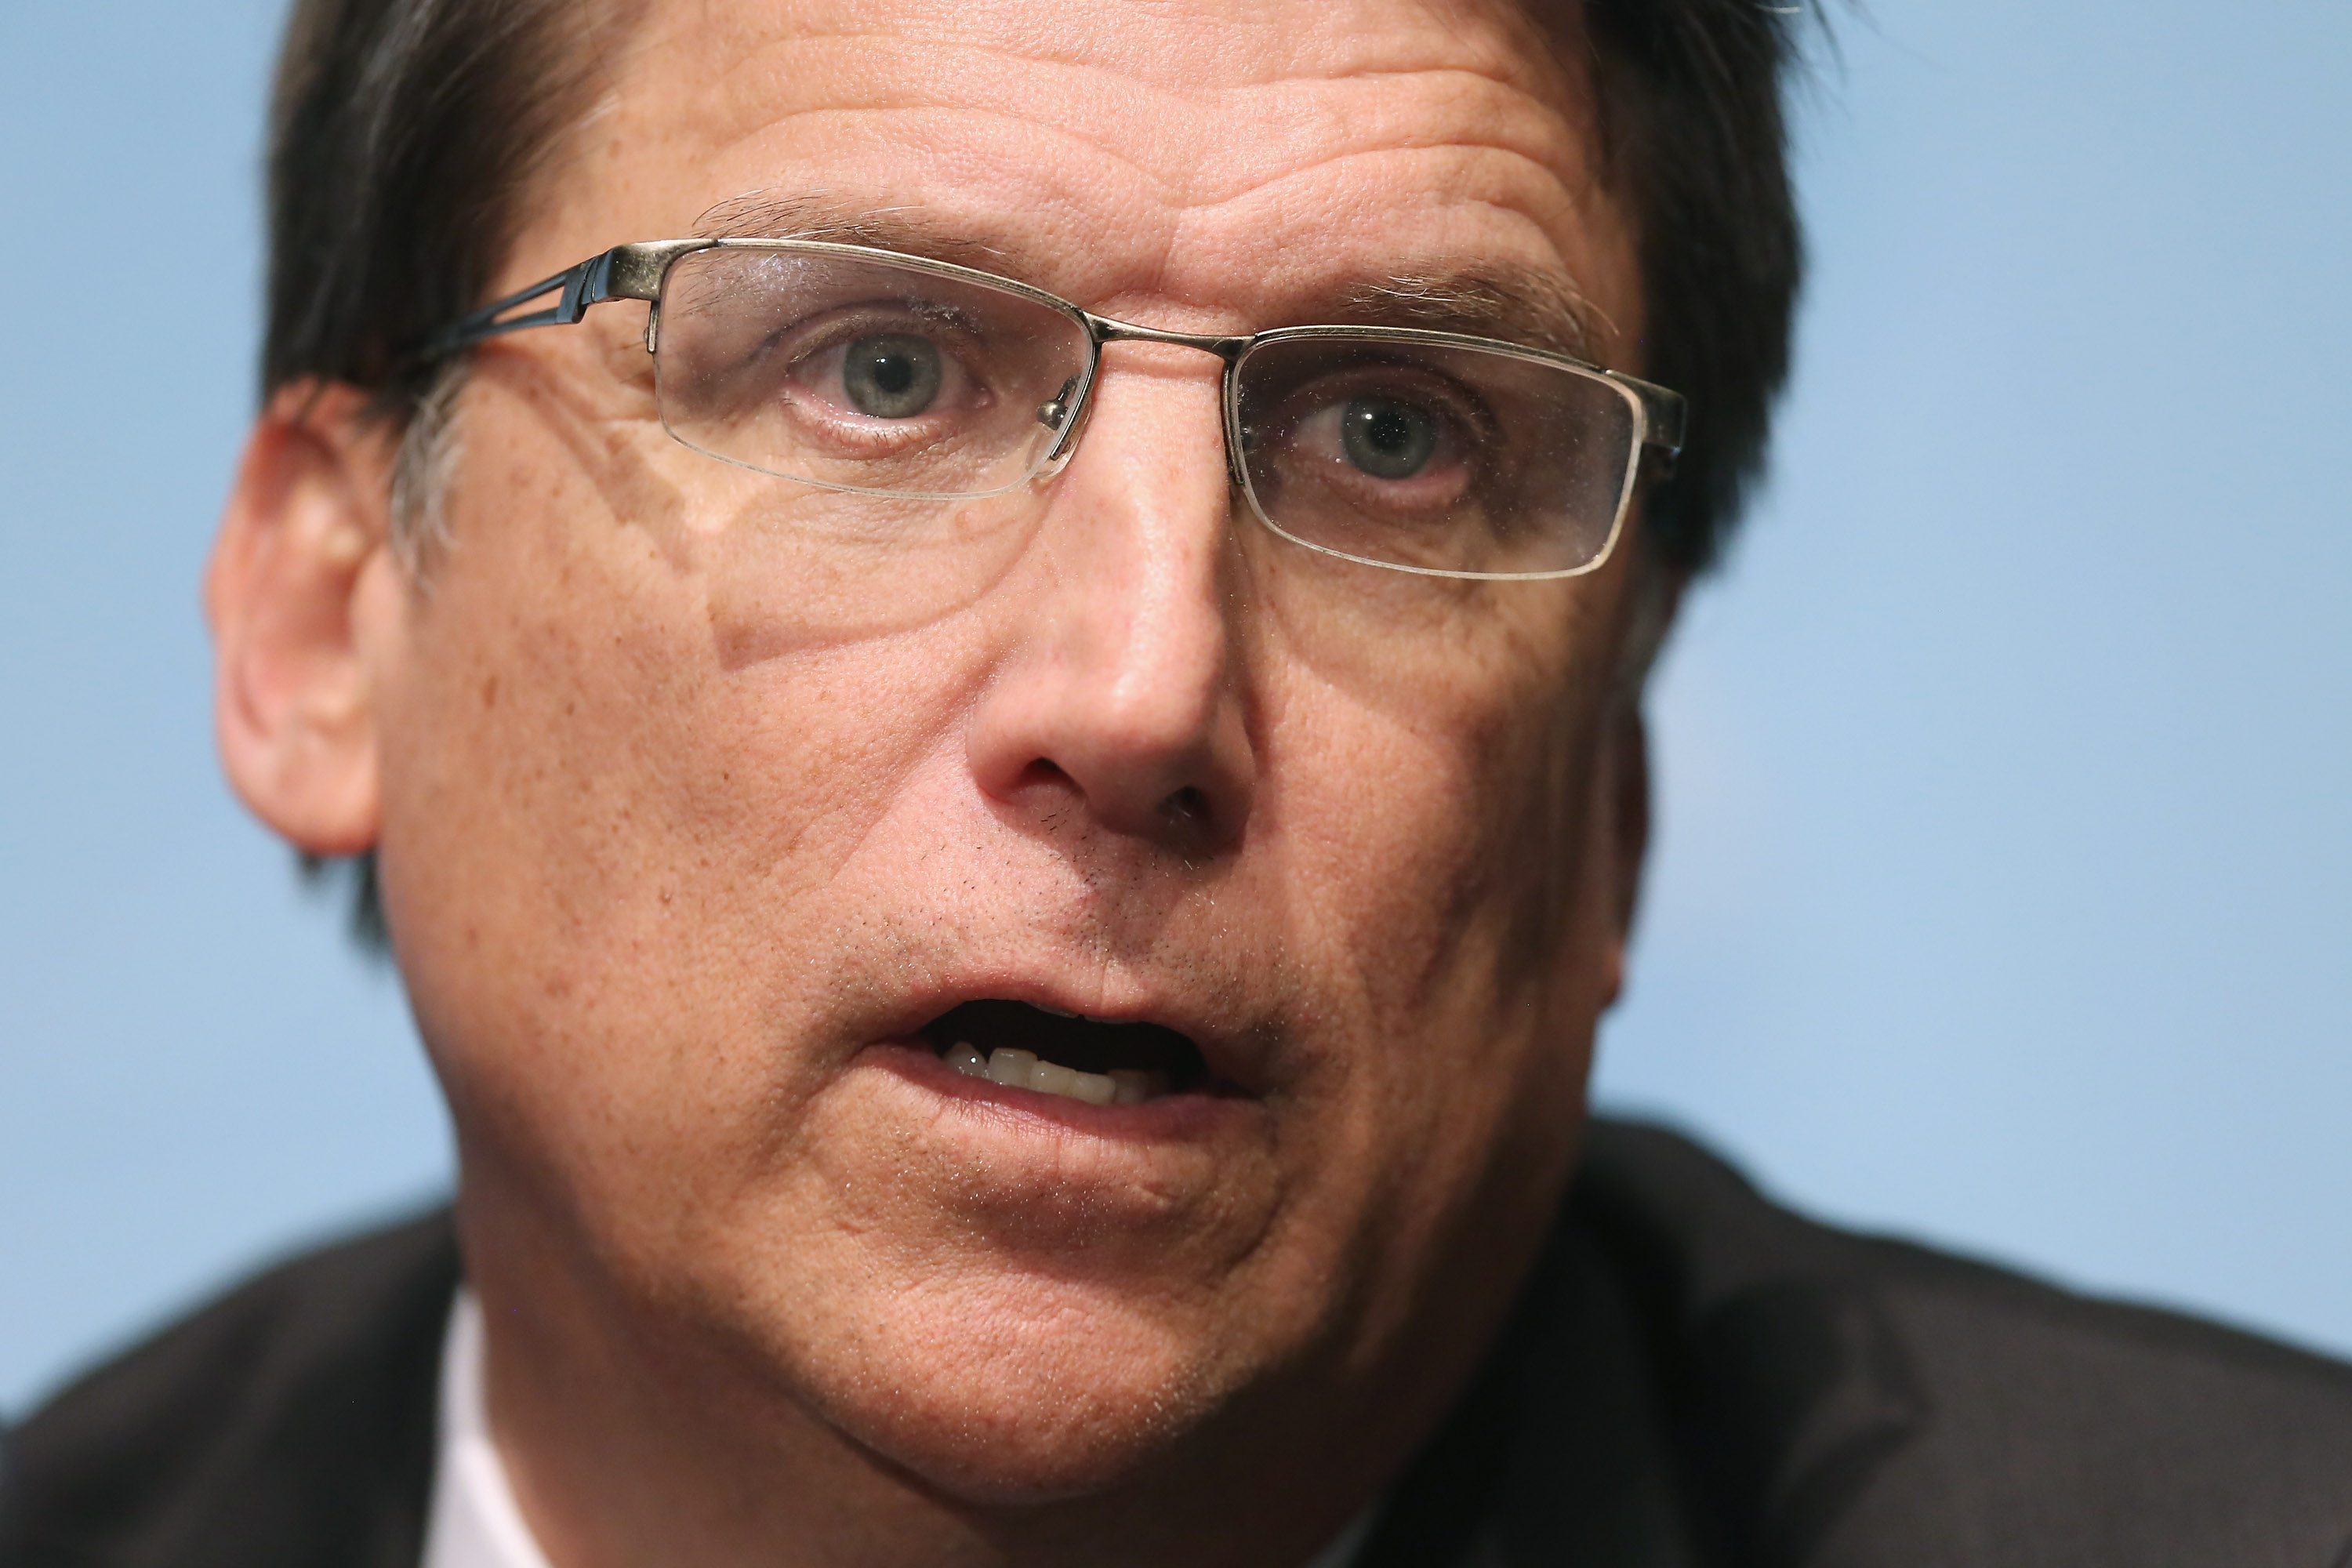 North Carolina Governor Pat McCrory holds a news conference with fellow members of the Republican Governors Association at the U.S. Chamber of Commerce in Washington, D.C., on Feb. 23, 2015. (Chip Somodevilla—Getty Images)